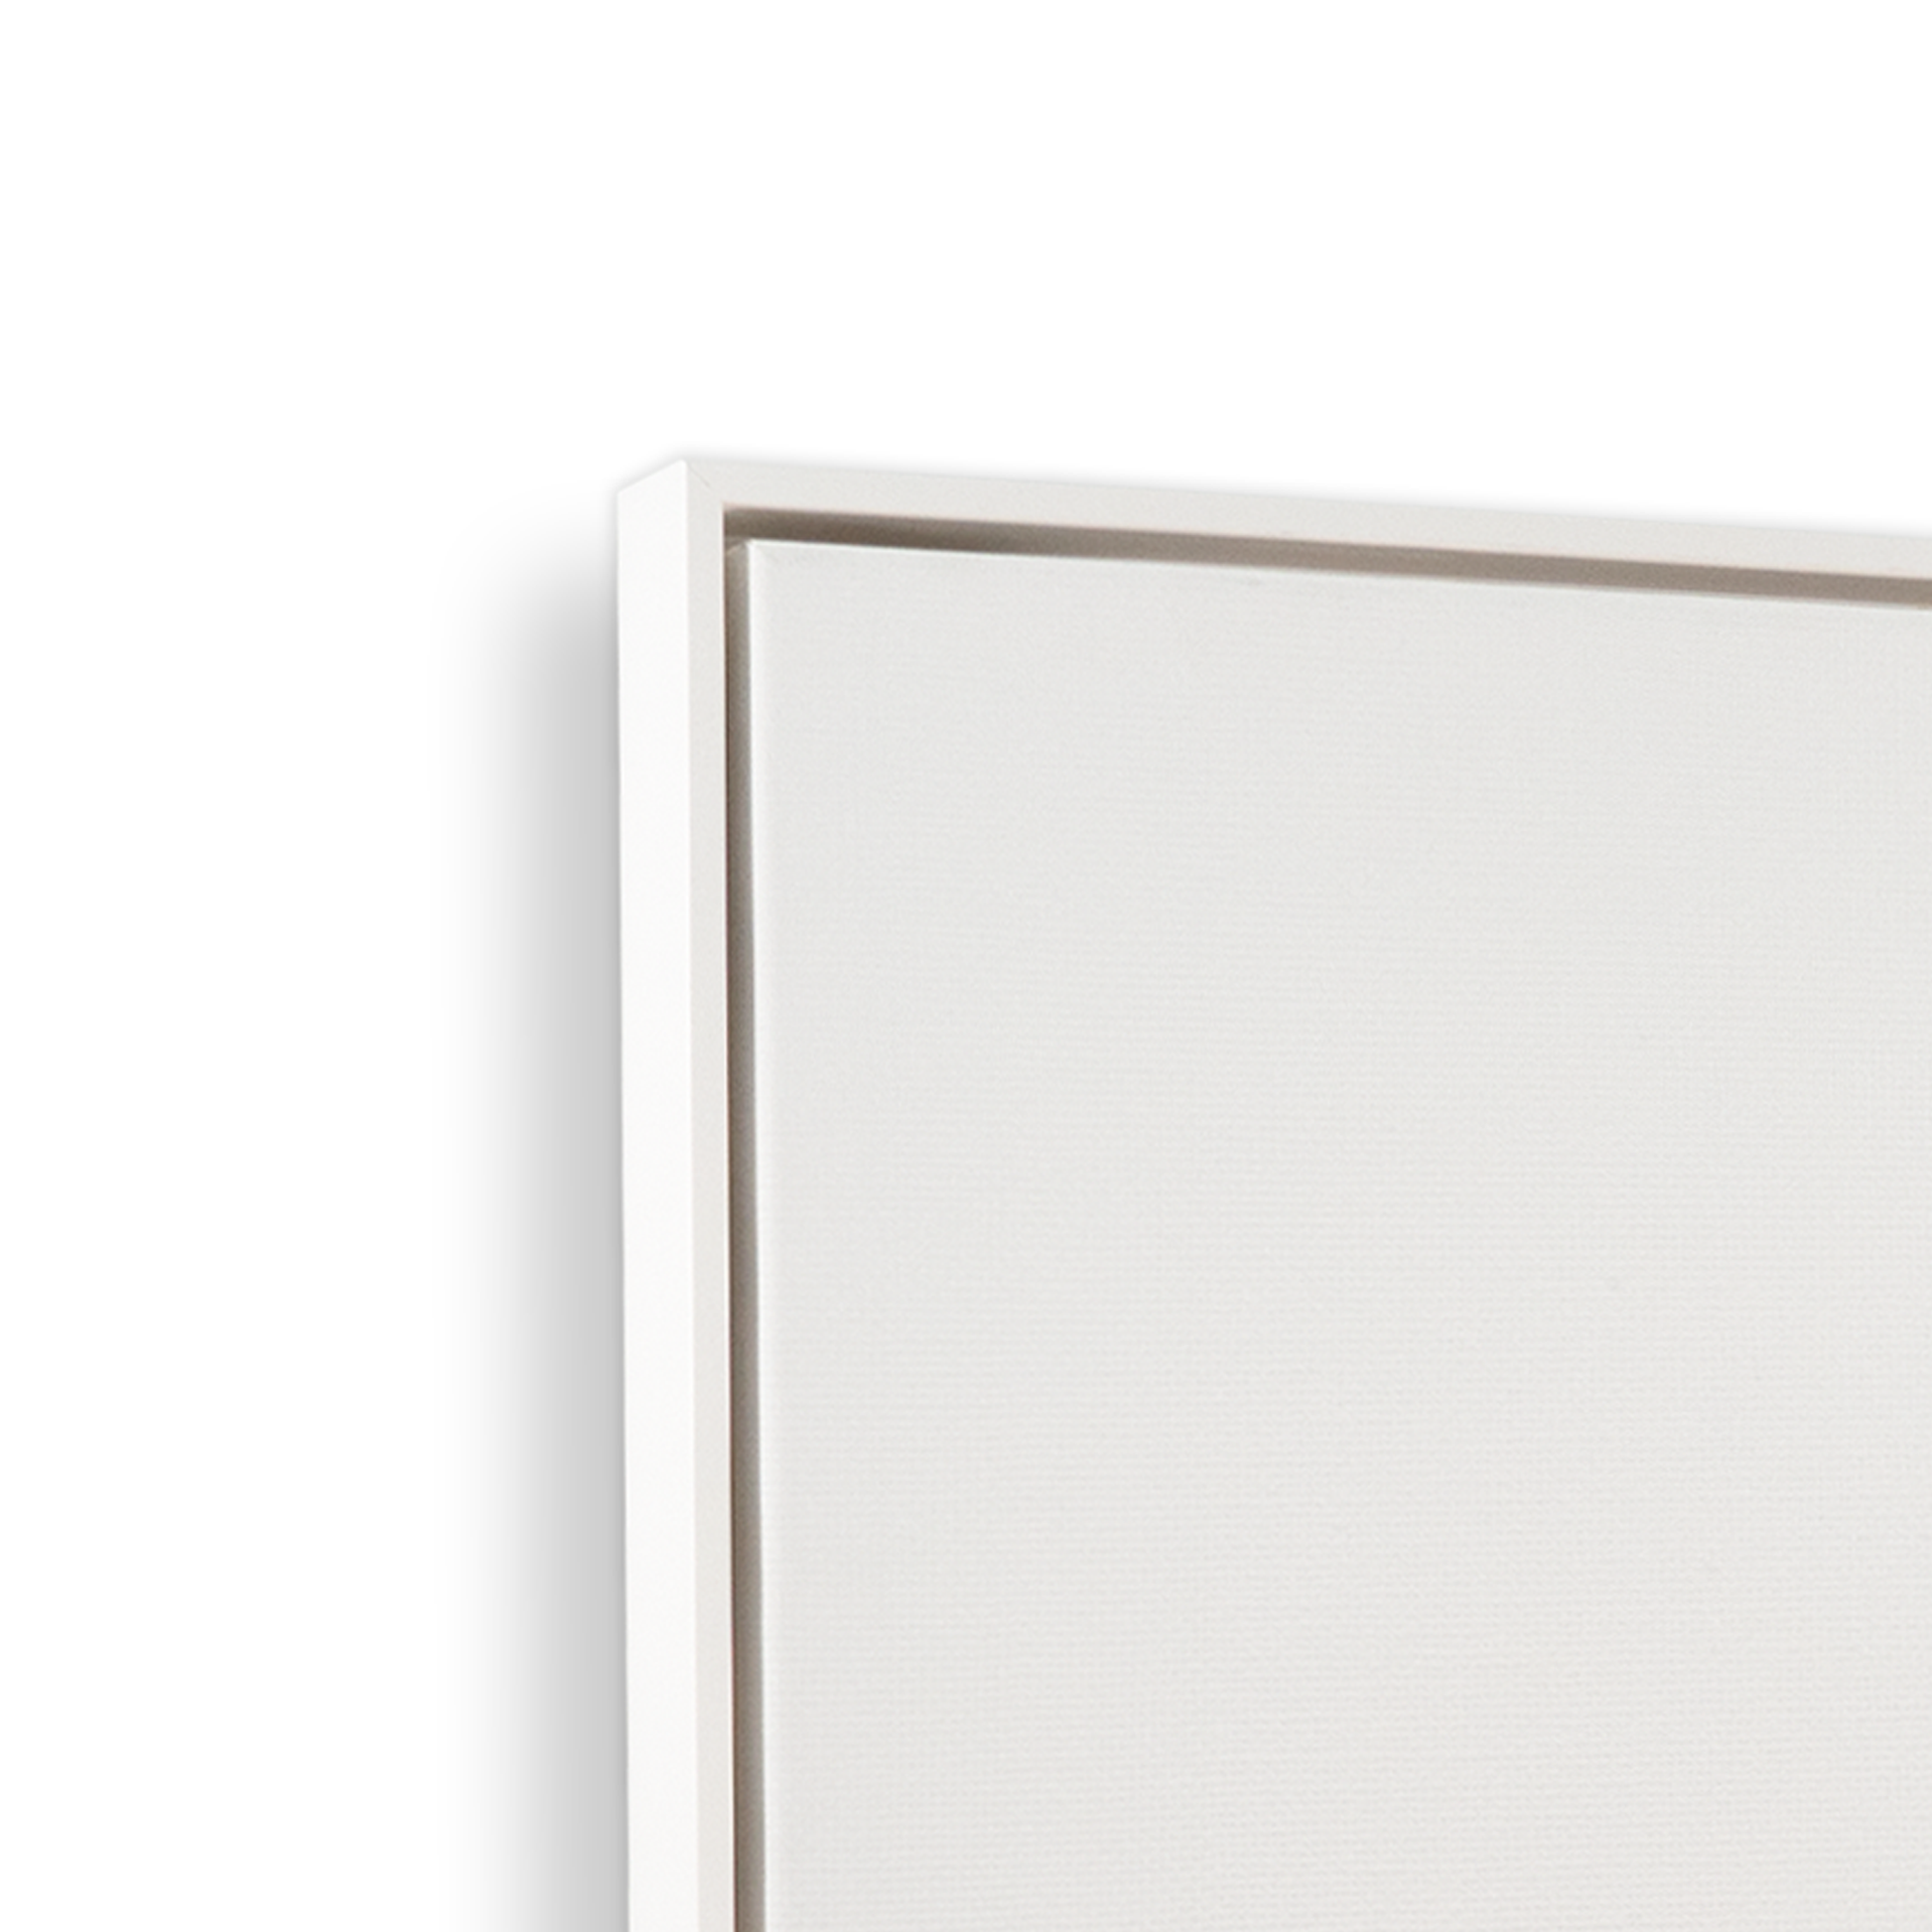 [color:Satin White],[shape:rectangle], Picture of corner of frame